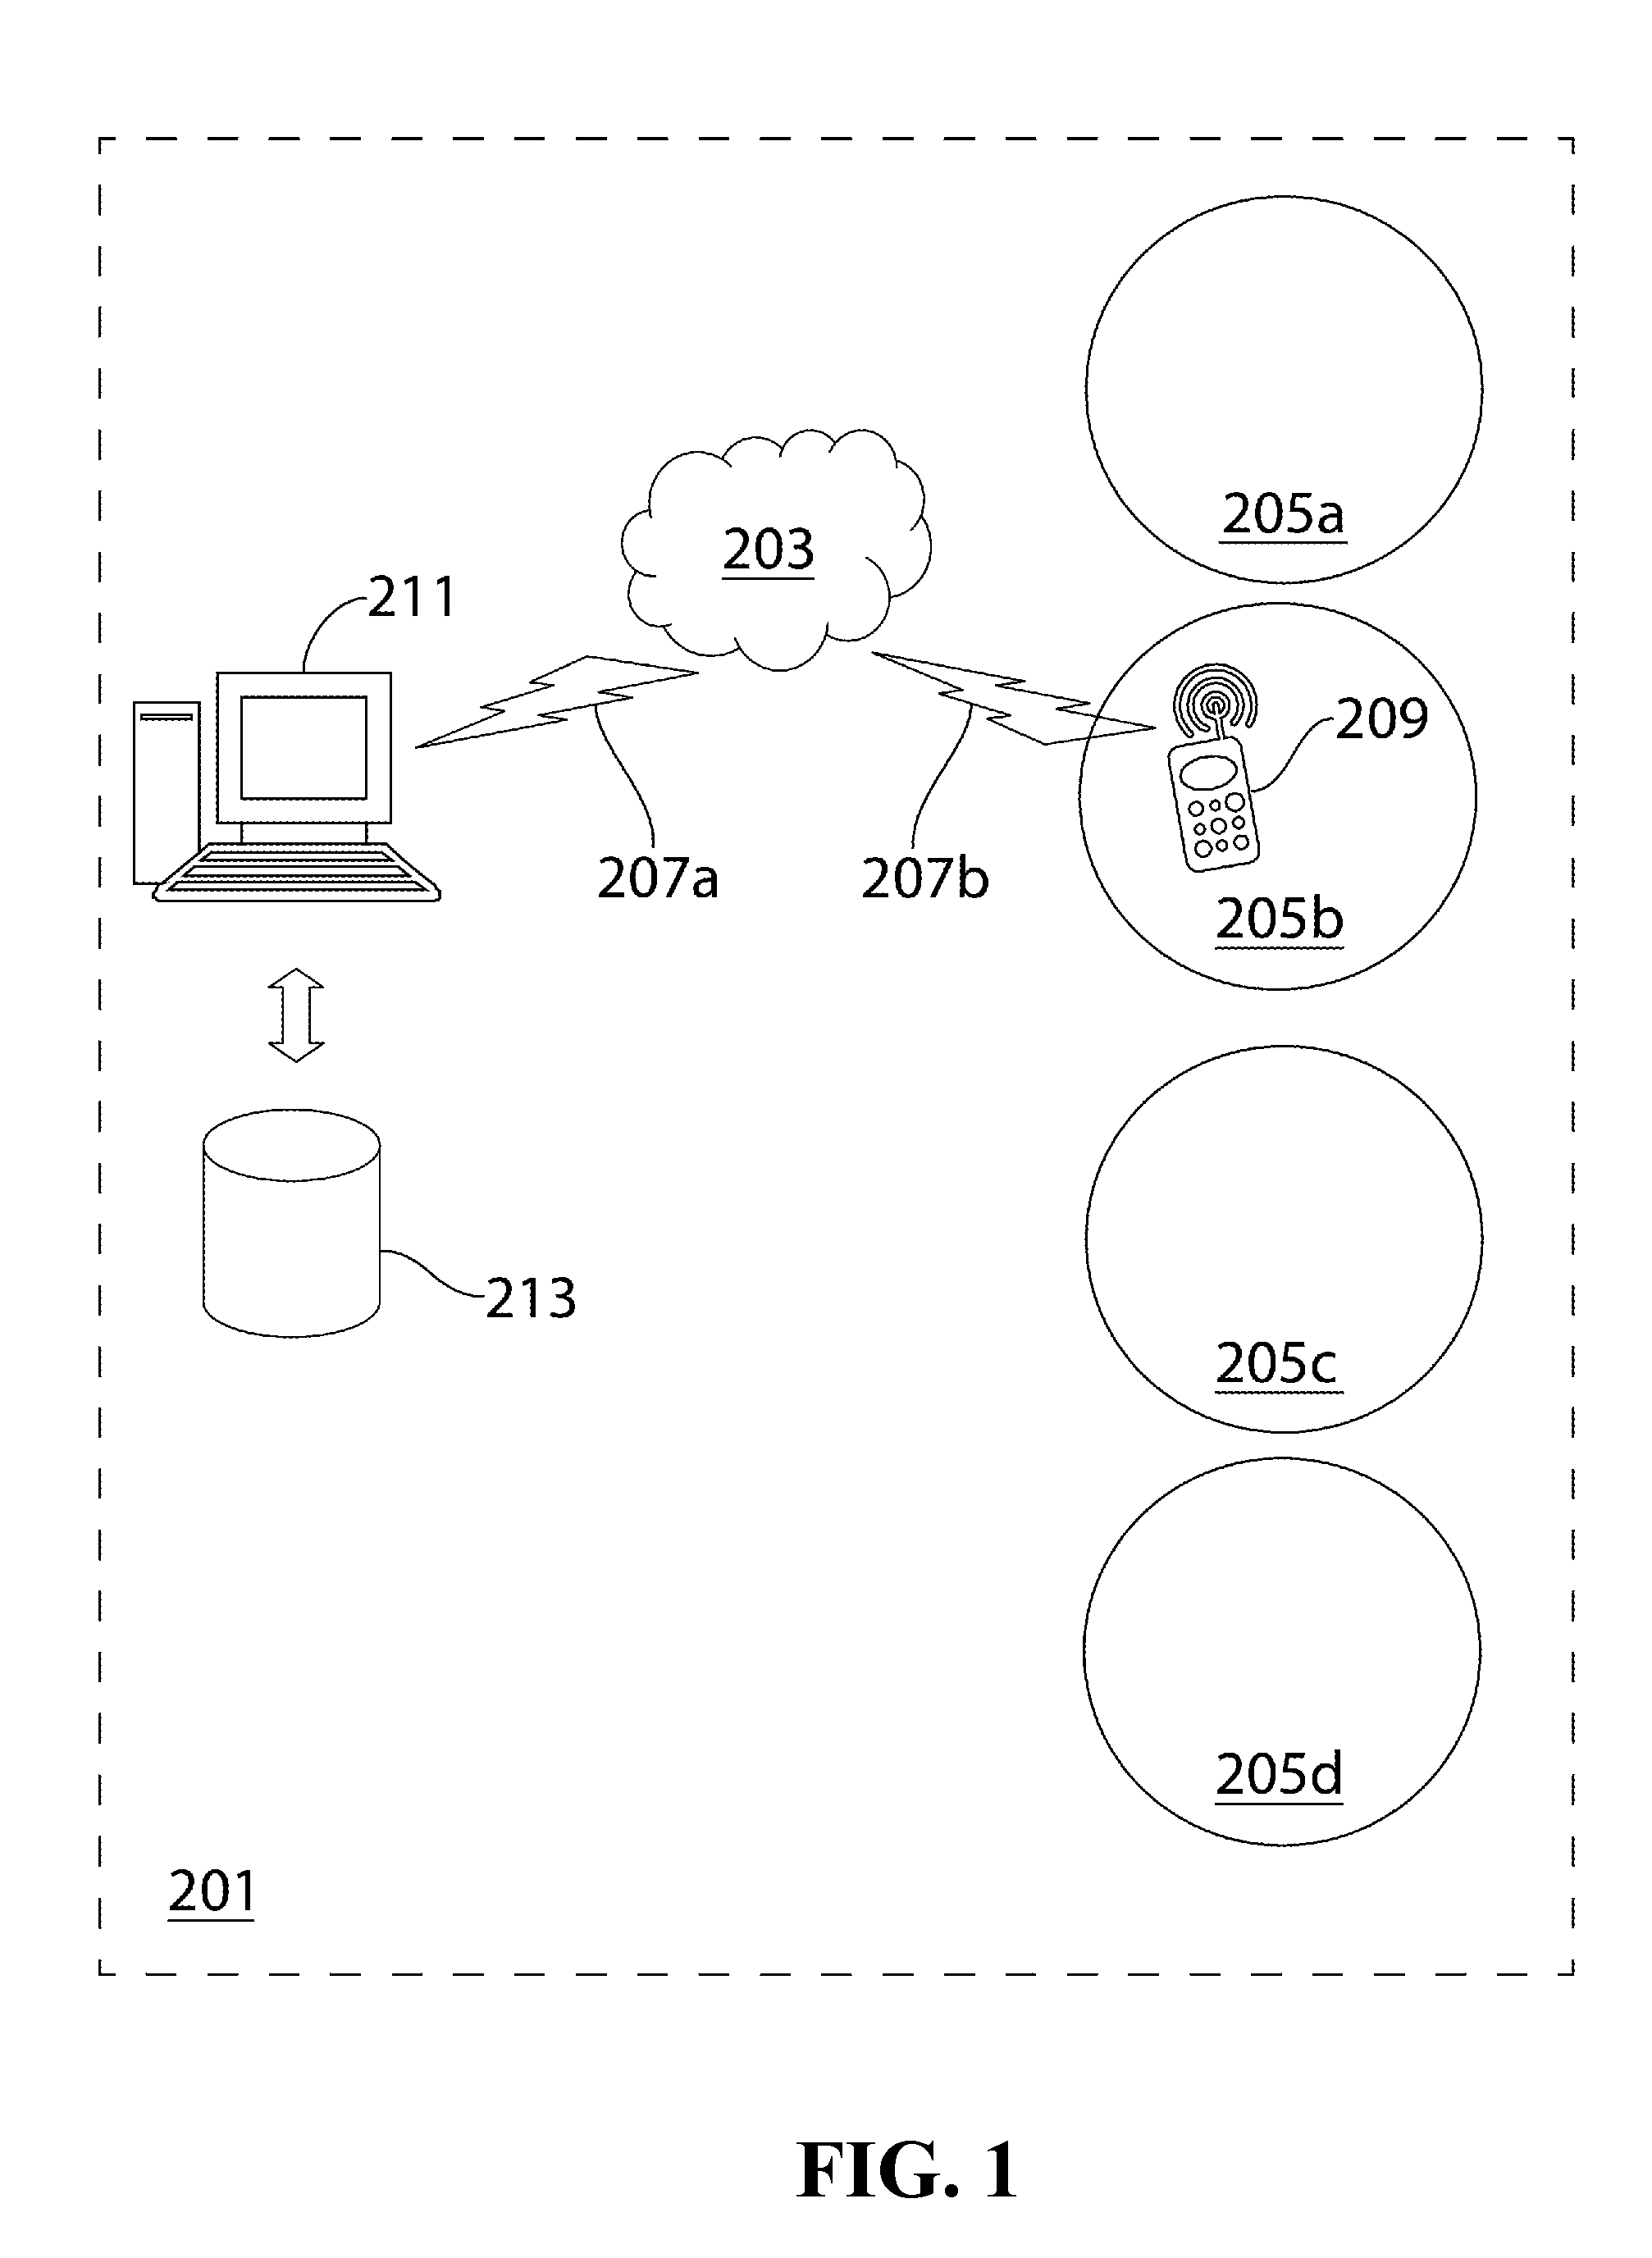 Geo-Fence Entry and Exit Notification System